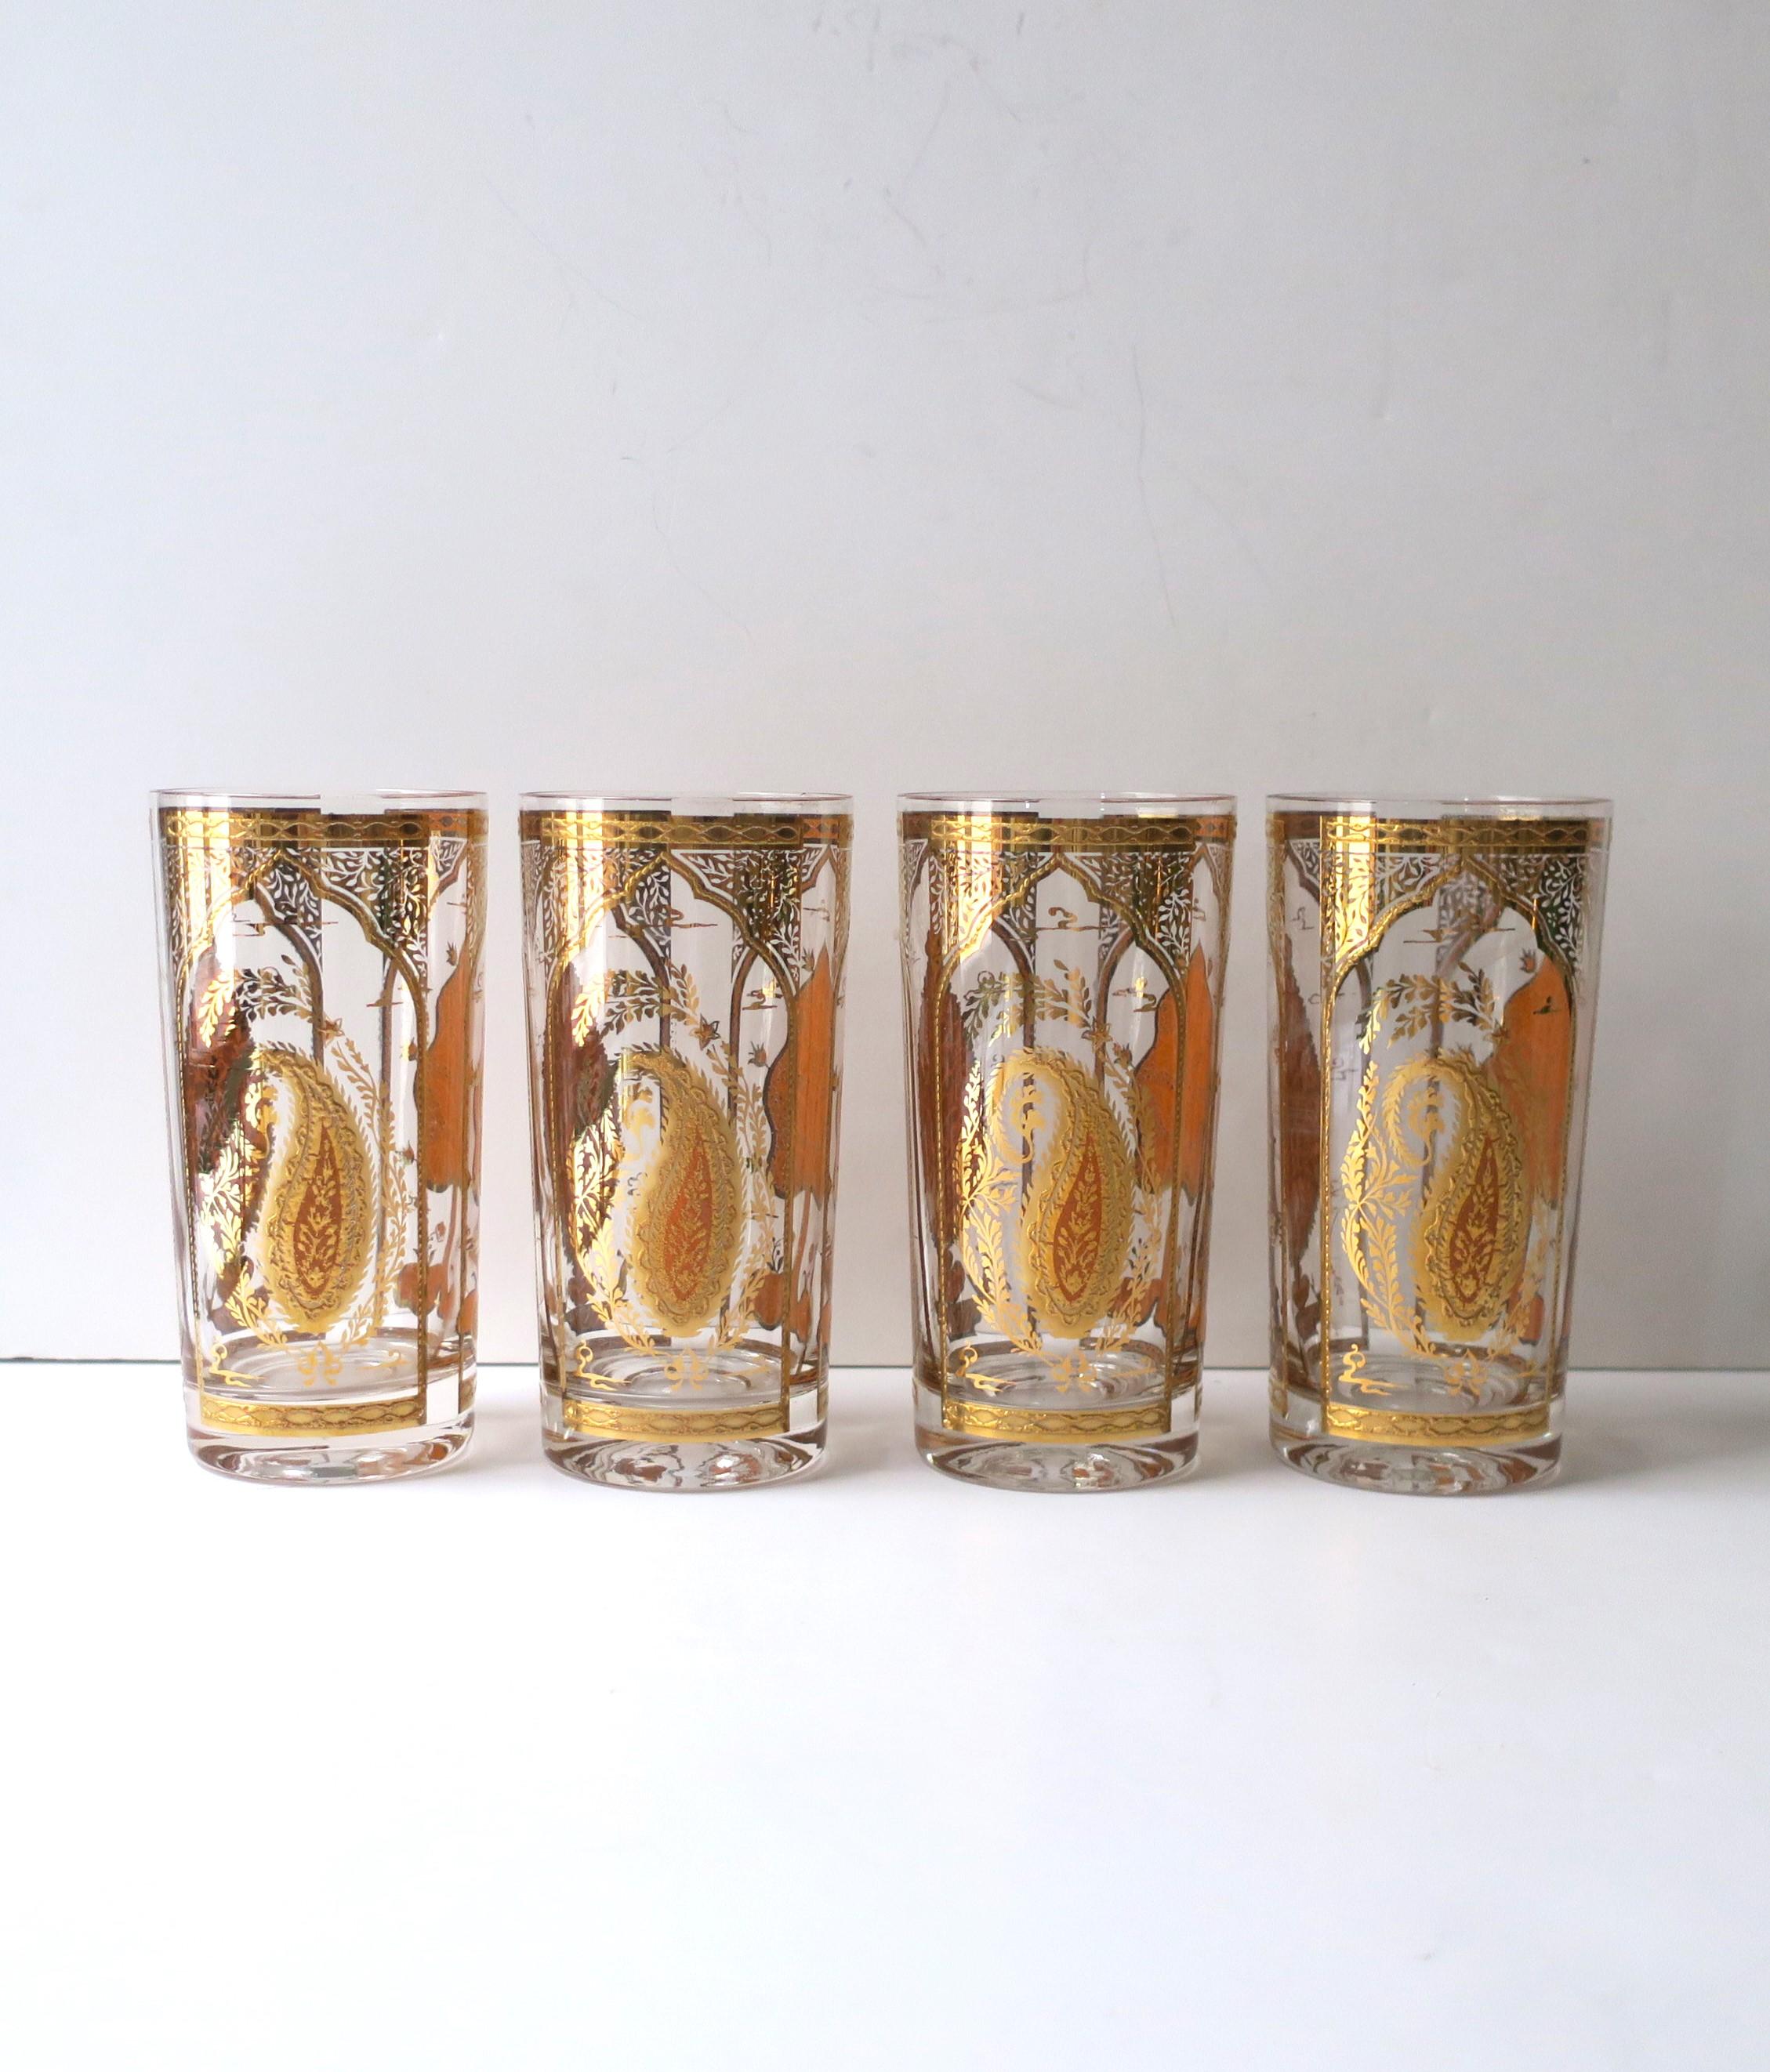 A beautiful set of four (4) 22-kt gold paisley highball cocktail glasses with Moorish pattern, by Culver, Brooklyn, New York, circa mid to late-20th century. This design is a rare and hard to find. Glasses have three design motifs, paisley,